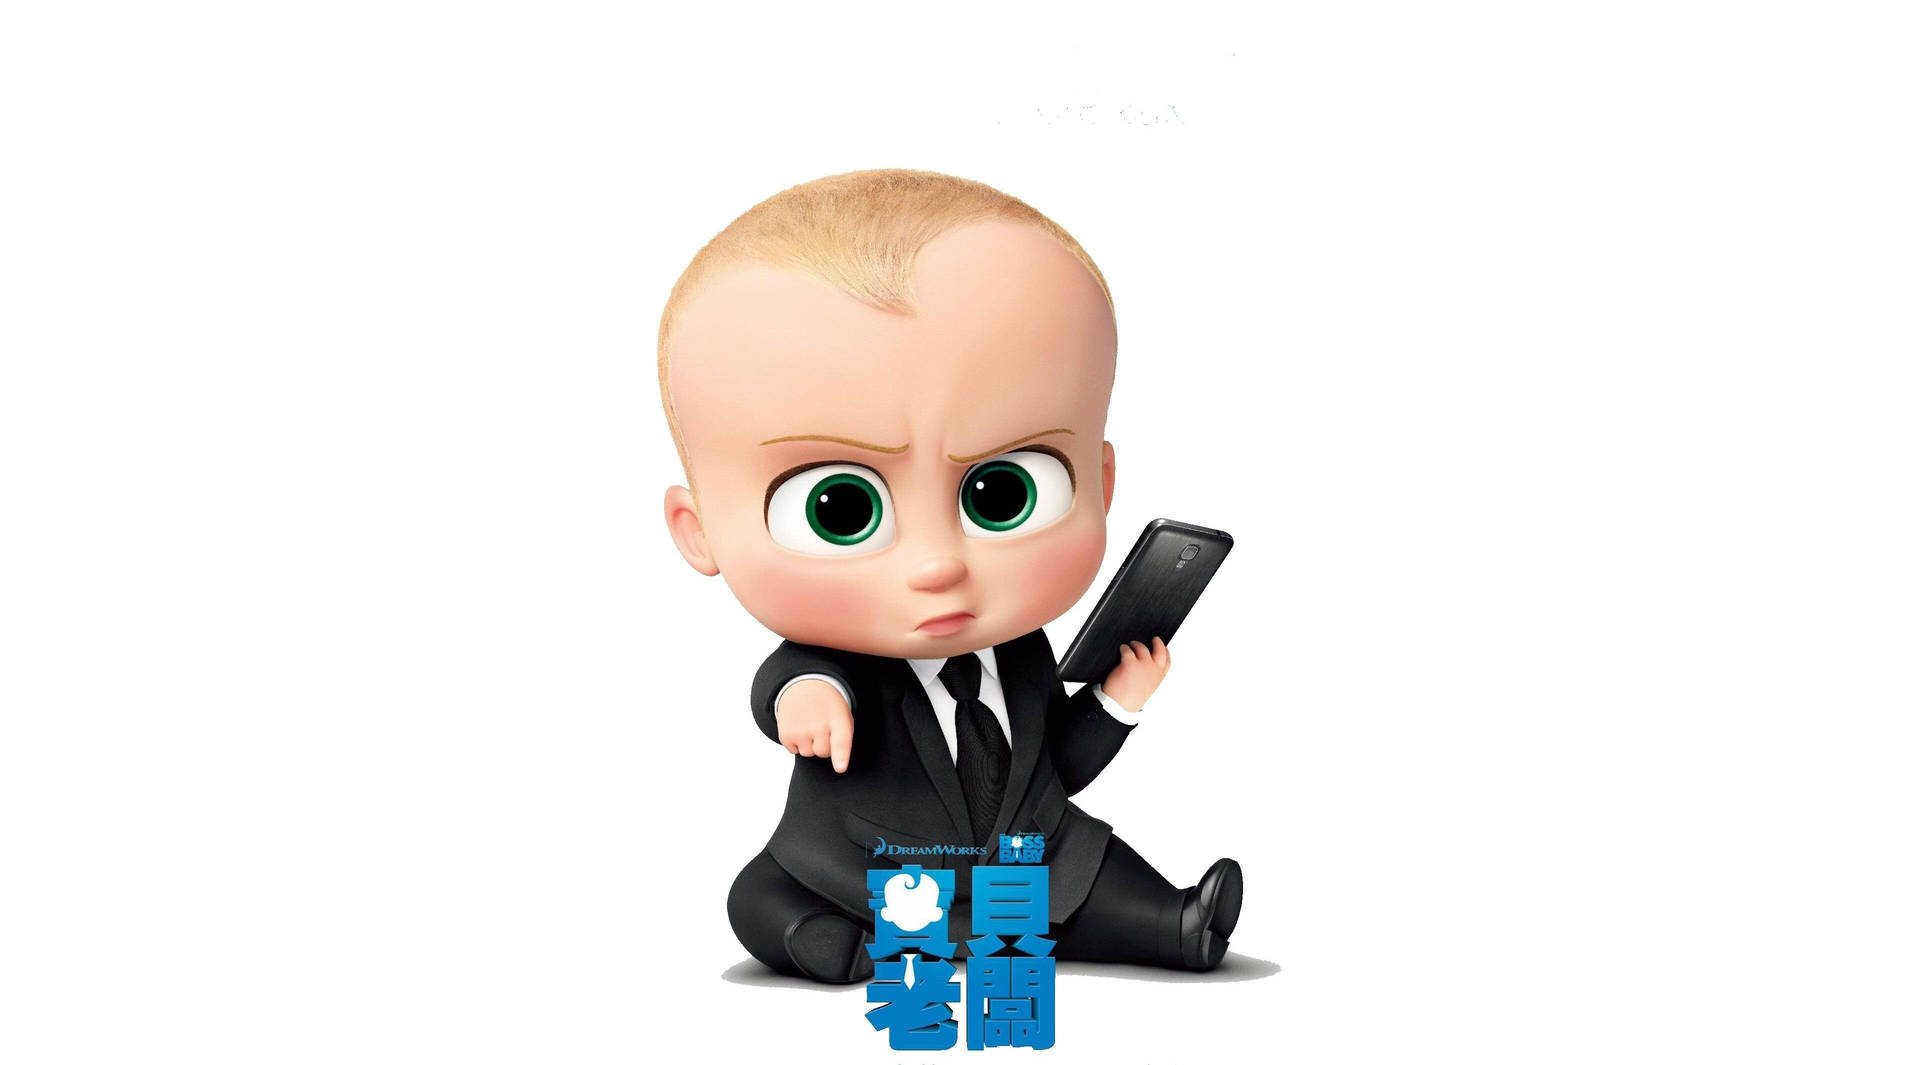 The Boss Baby Movie Poster Background